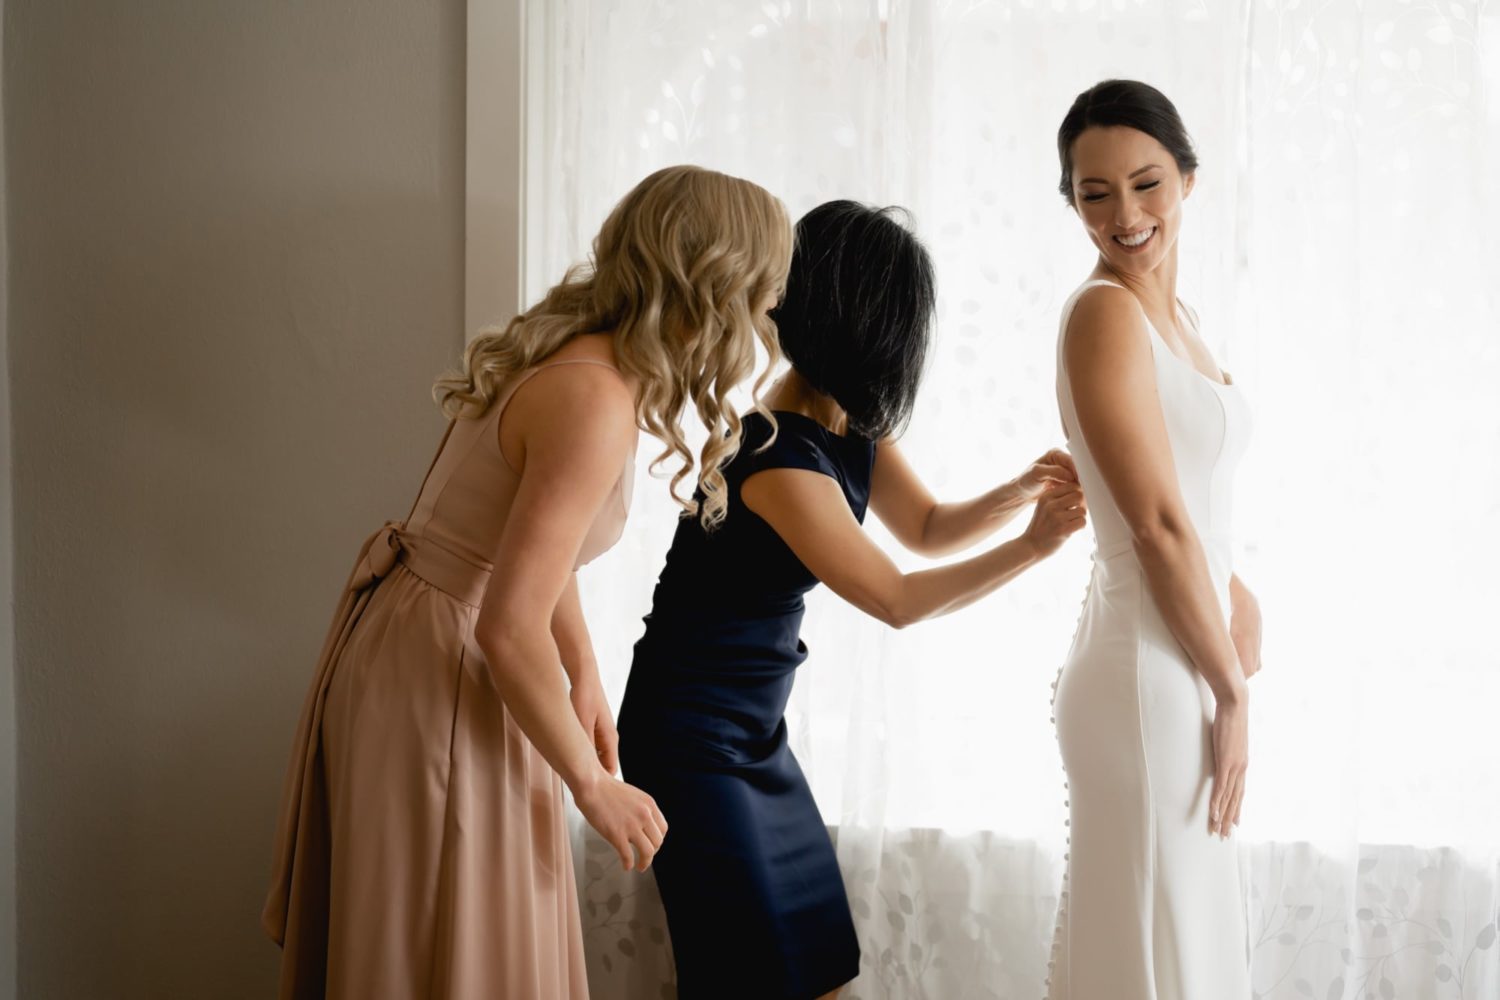 Mother of the bride and maid of honor helping bride into wedding dress in Airbnb